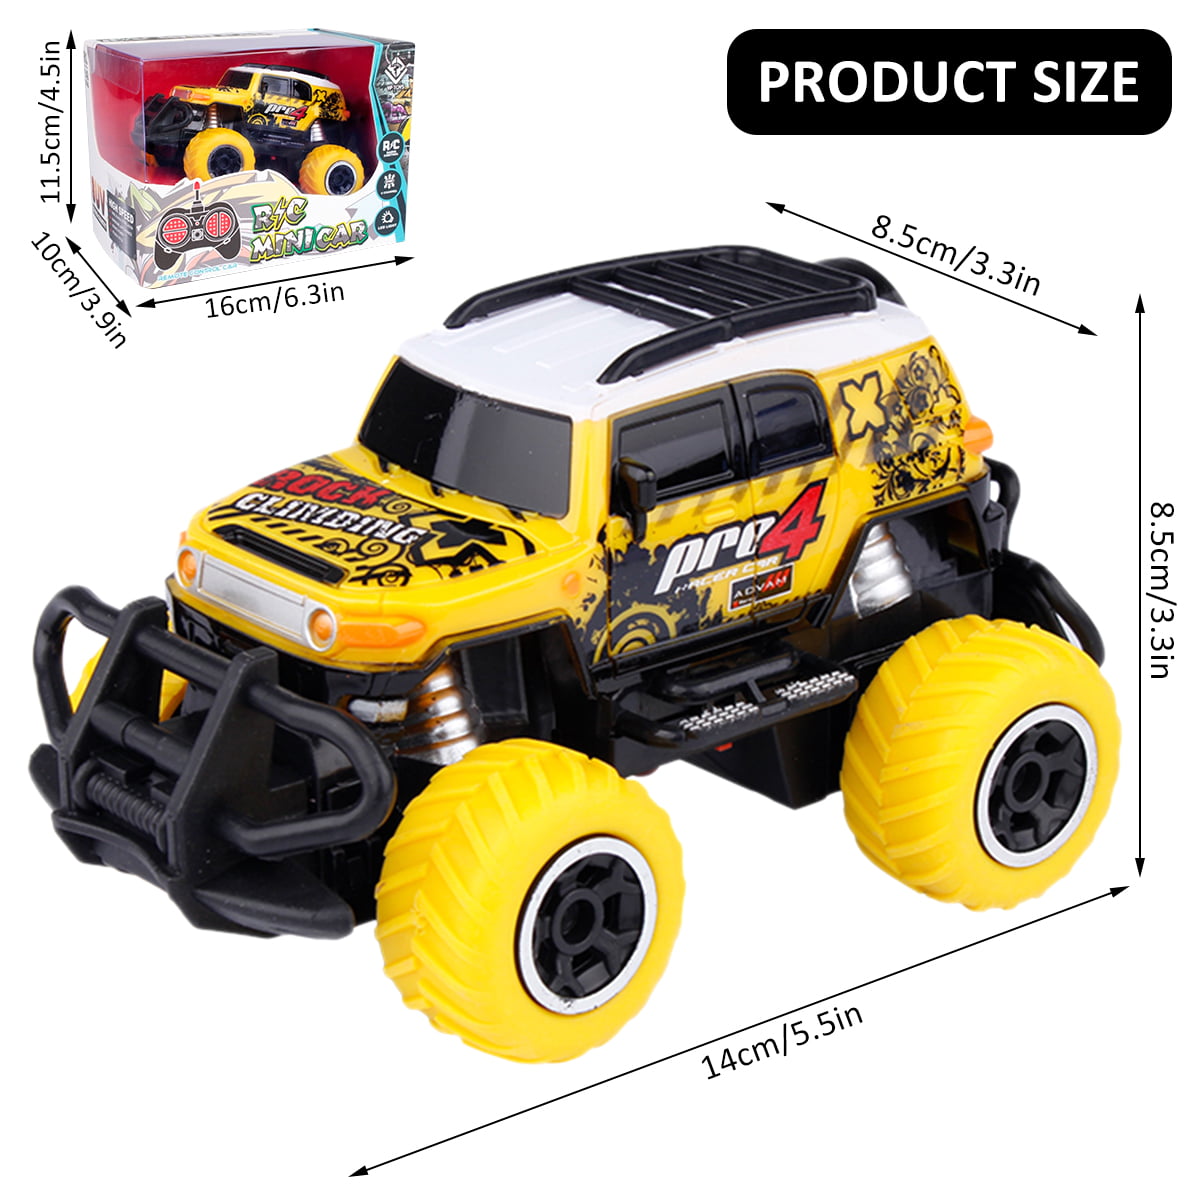 1:43 2.4G 4WD RC Car Remote Control High Speed Electric Toy Truck Christmas Gift 